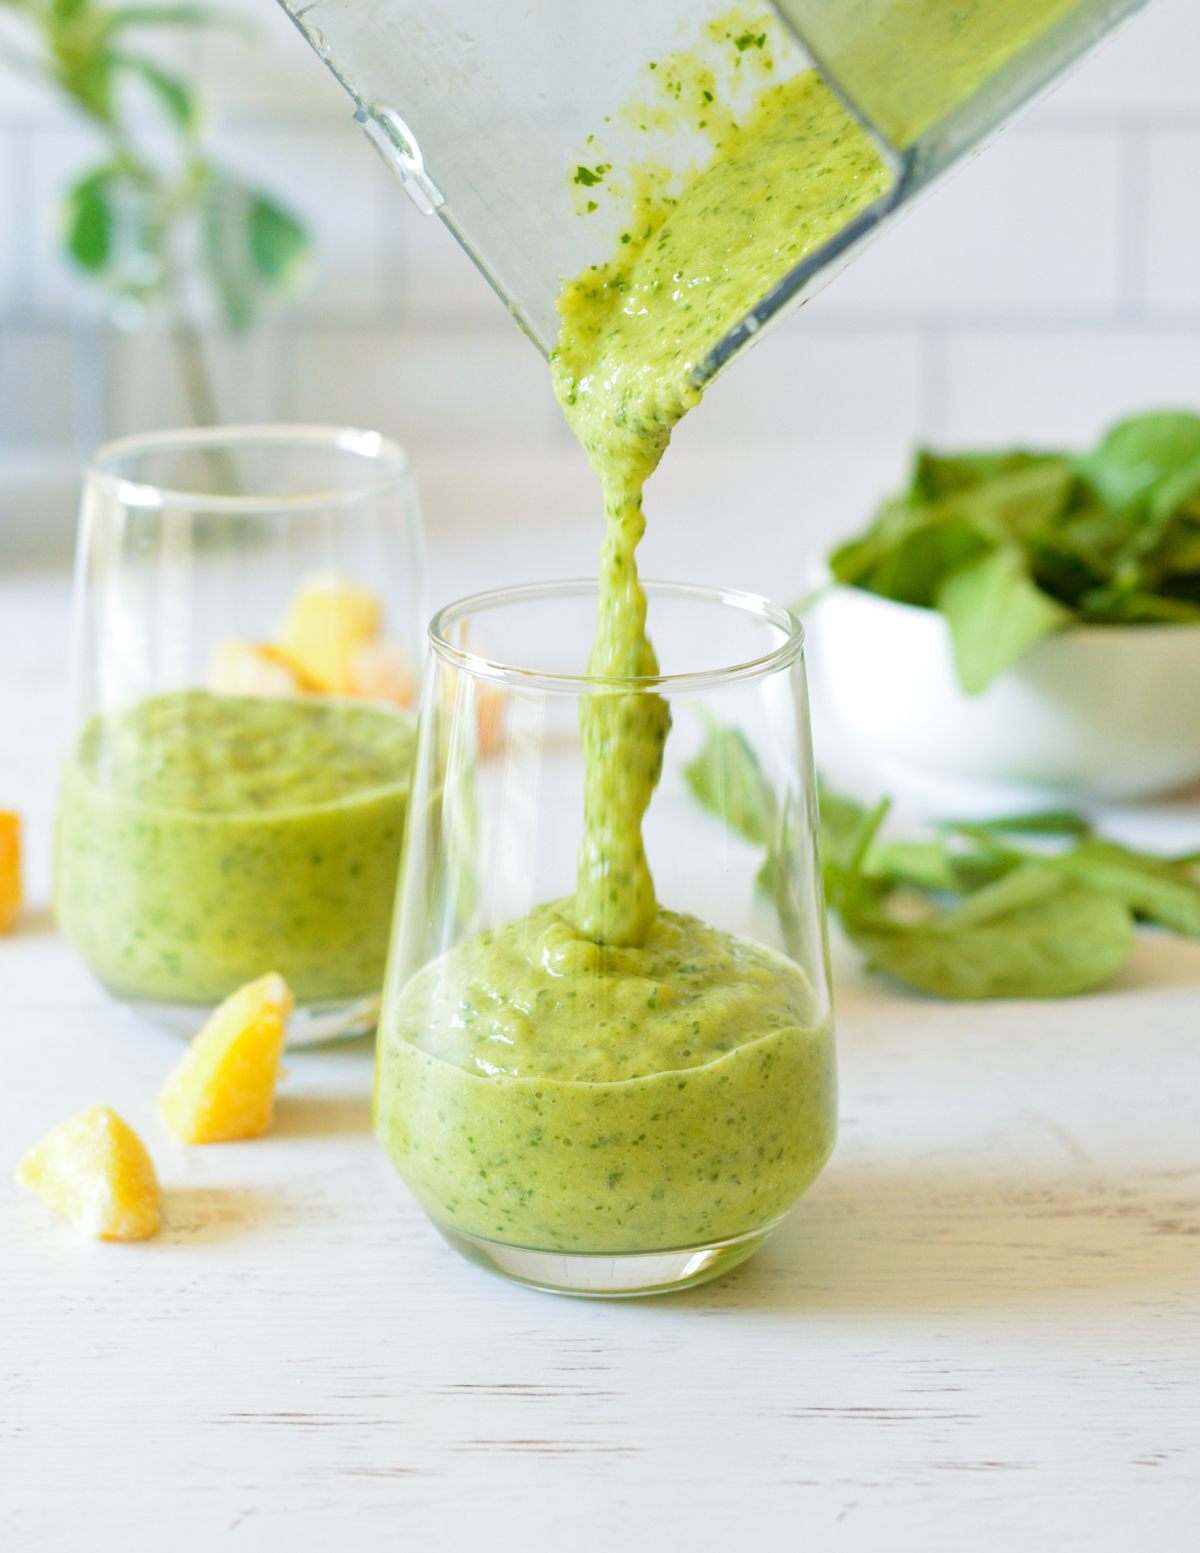 pouring a green smoothie into a glass.